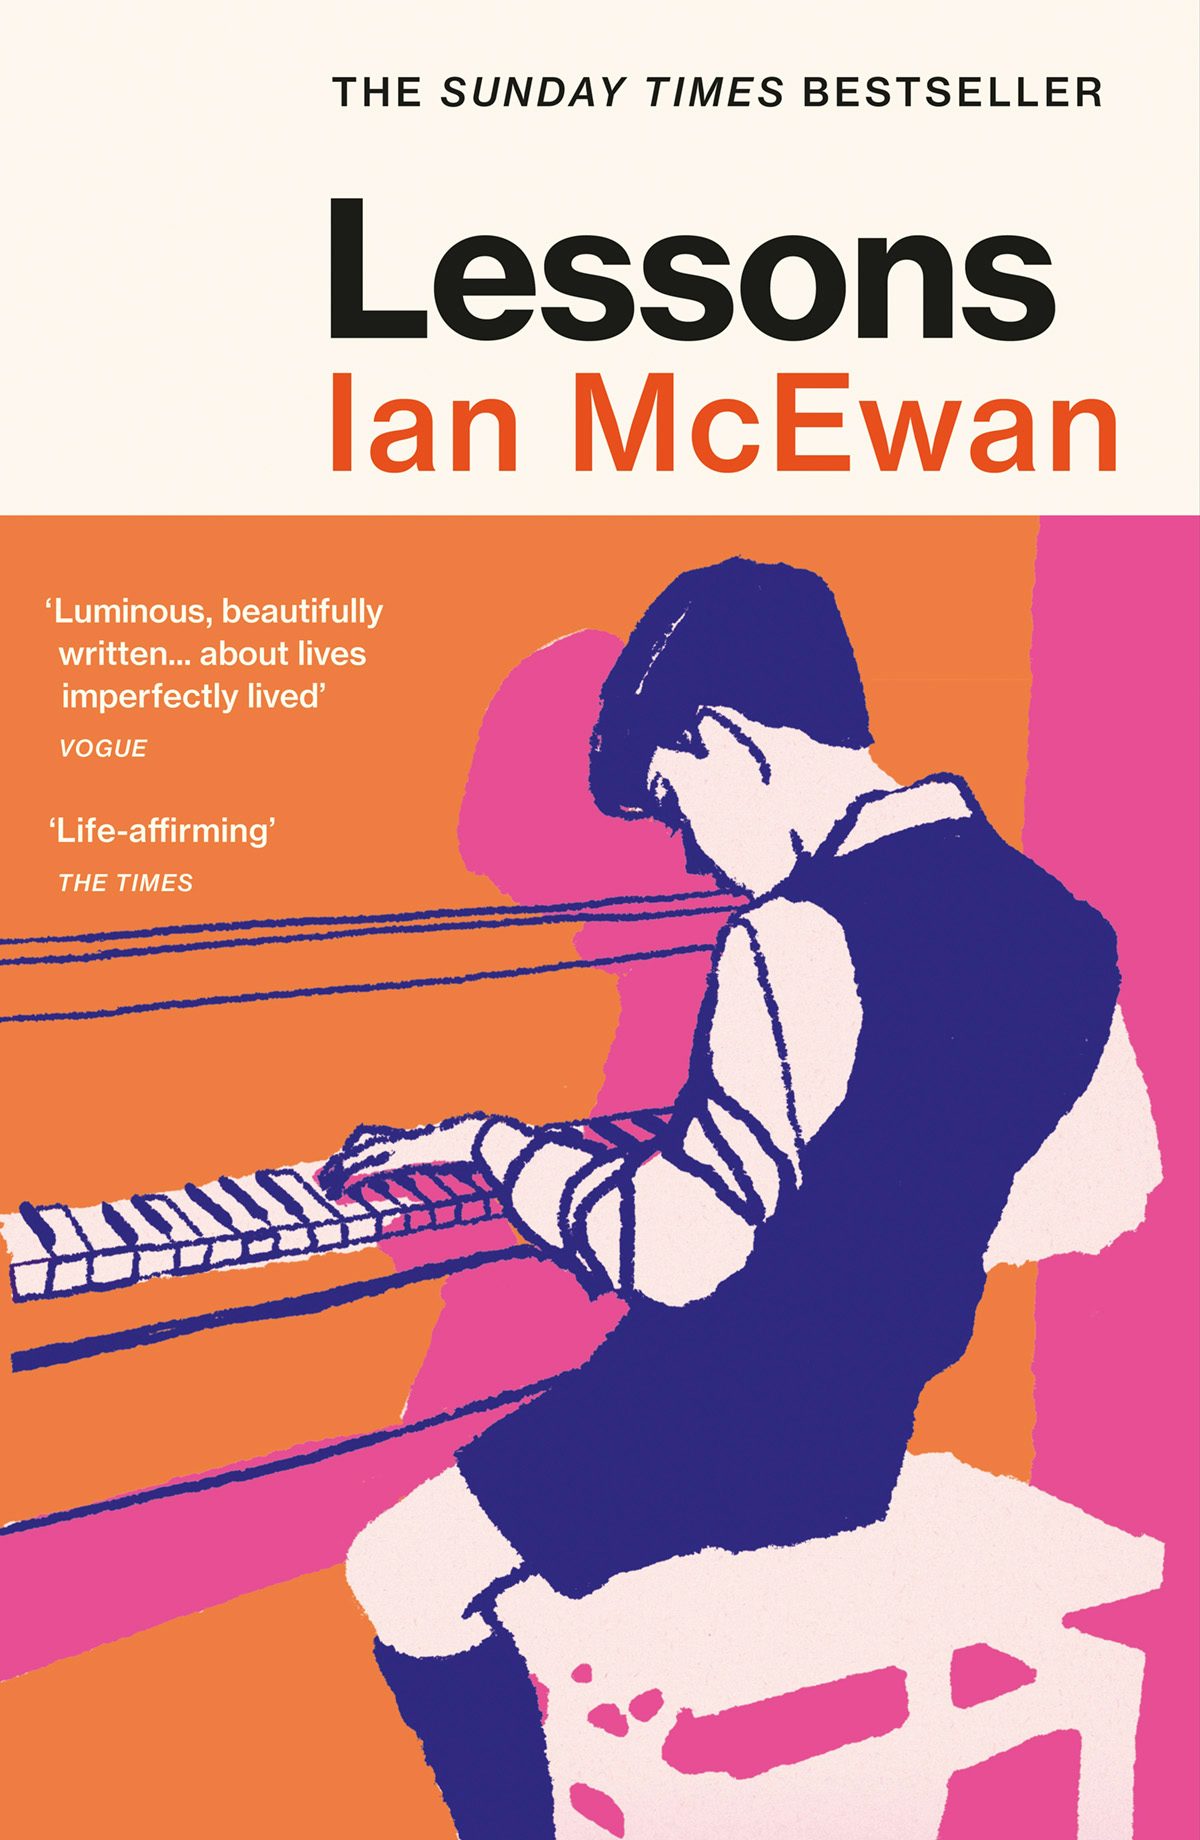 Cover of Lessons by Ian McEwan showing a line drawing young child with cropped hair, a shirt, waistcoat, and knee high socks sat at a piano in bright orange, pink and purple colours